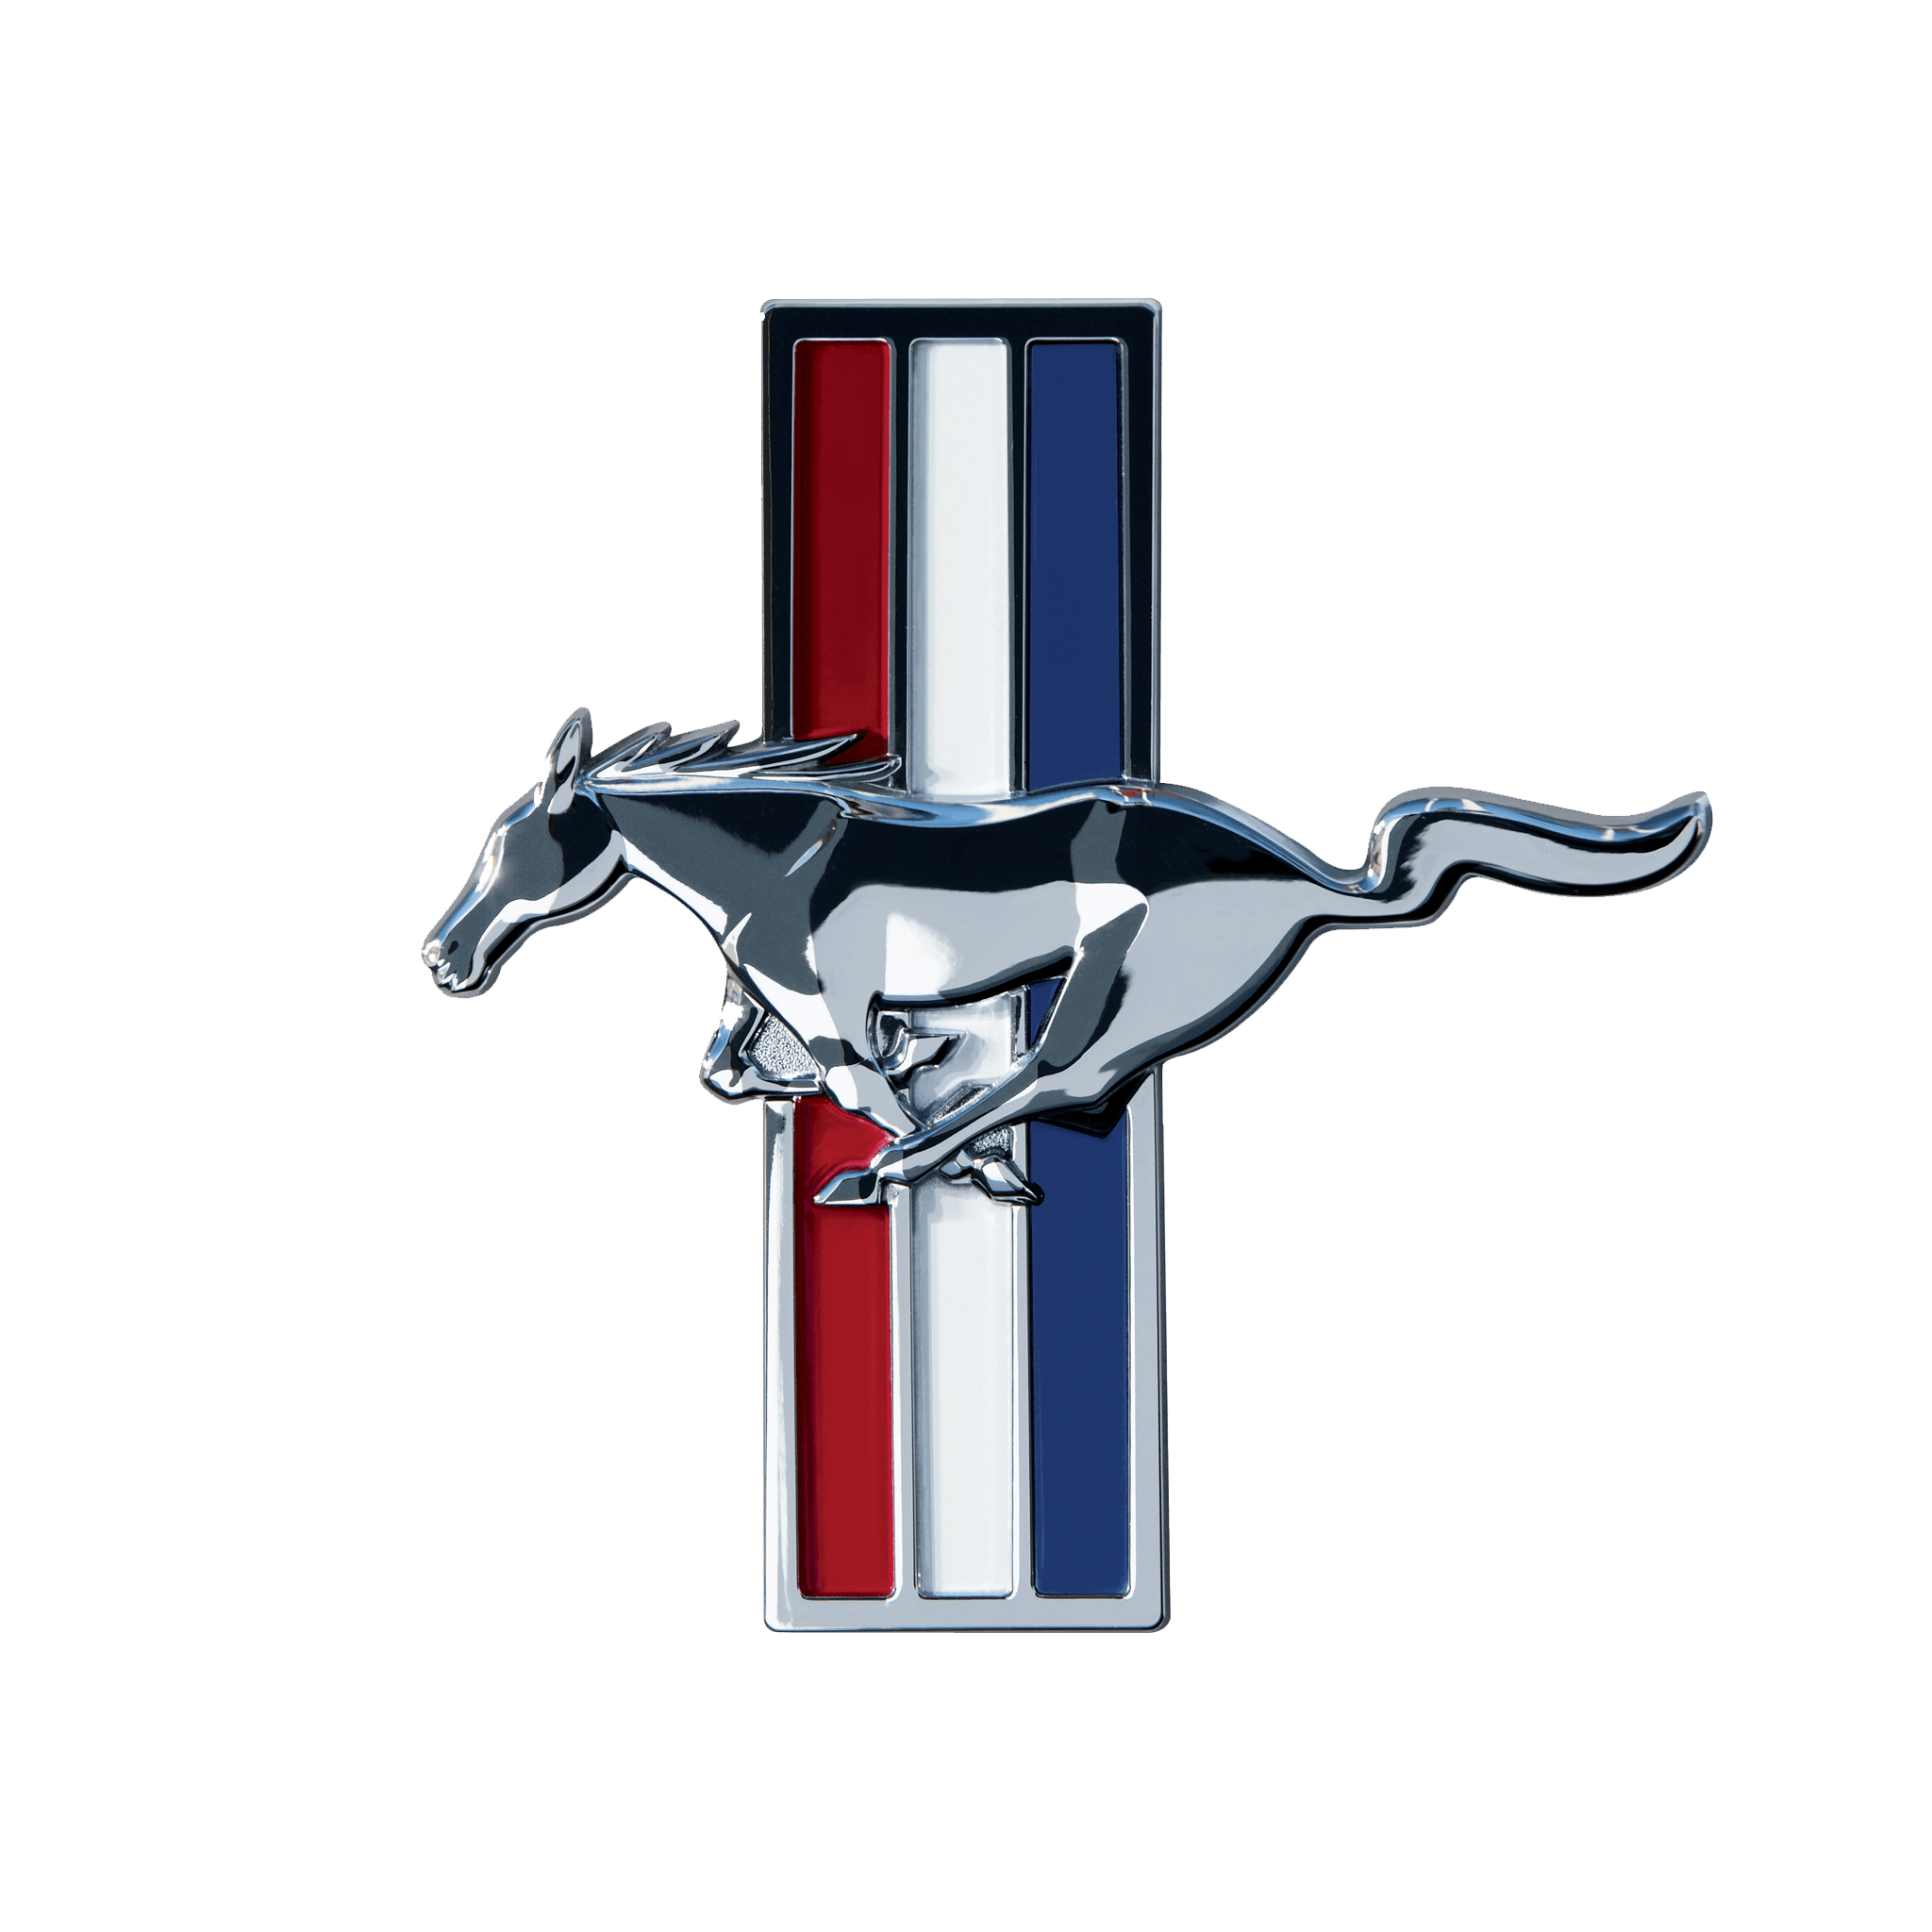 Old Shelby Logo - Mustang Logo (old) 2048x2048 | Automobile Logos | Pinterest ...